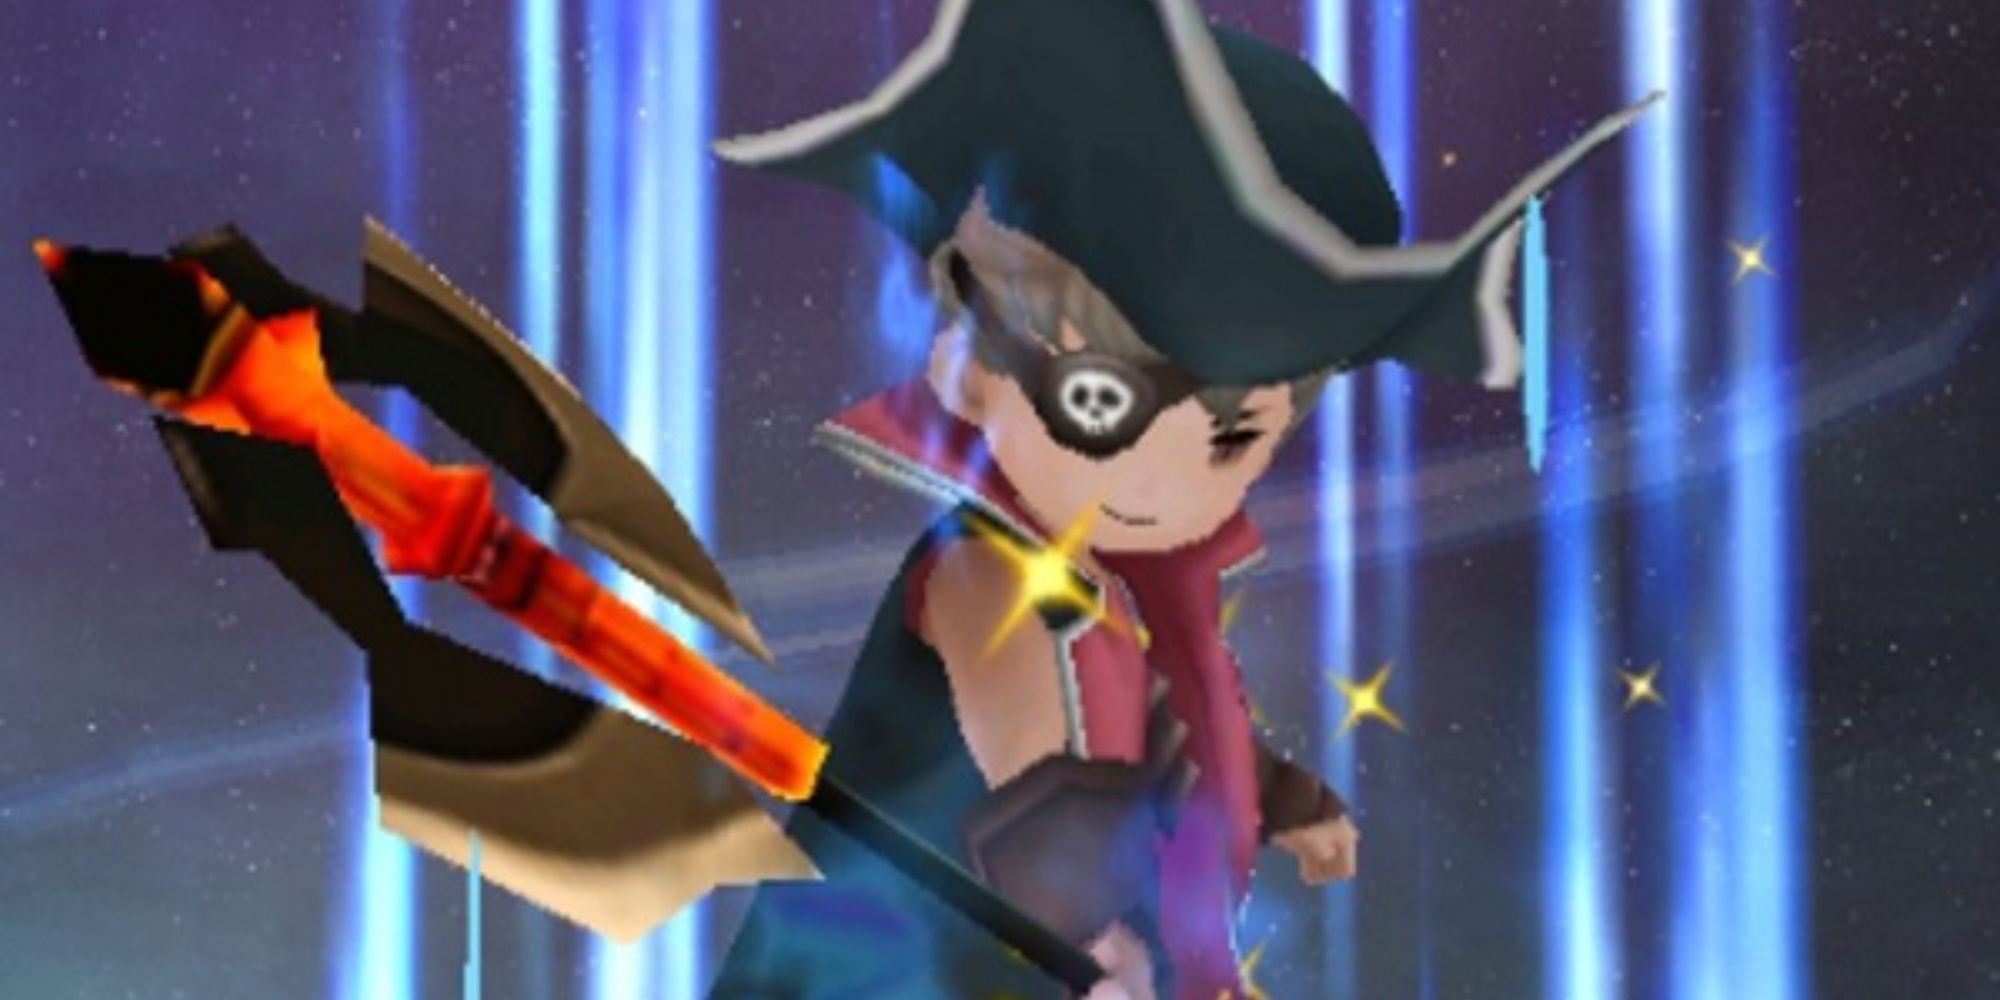 Tiz as a Pirate in Bravely Default